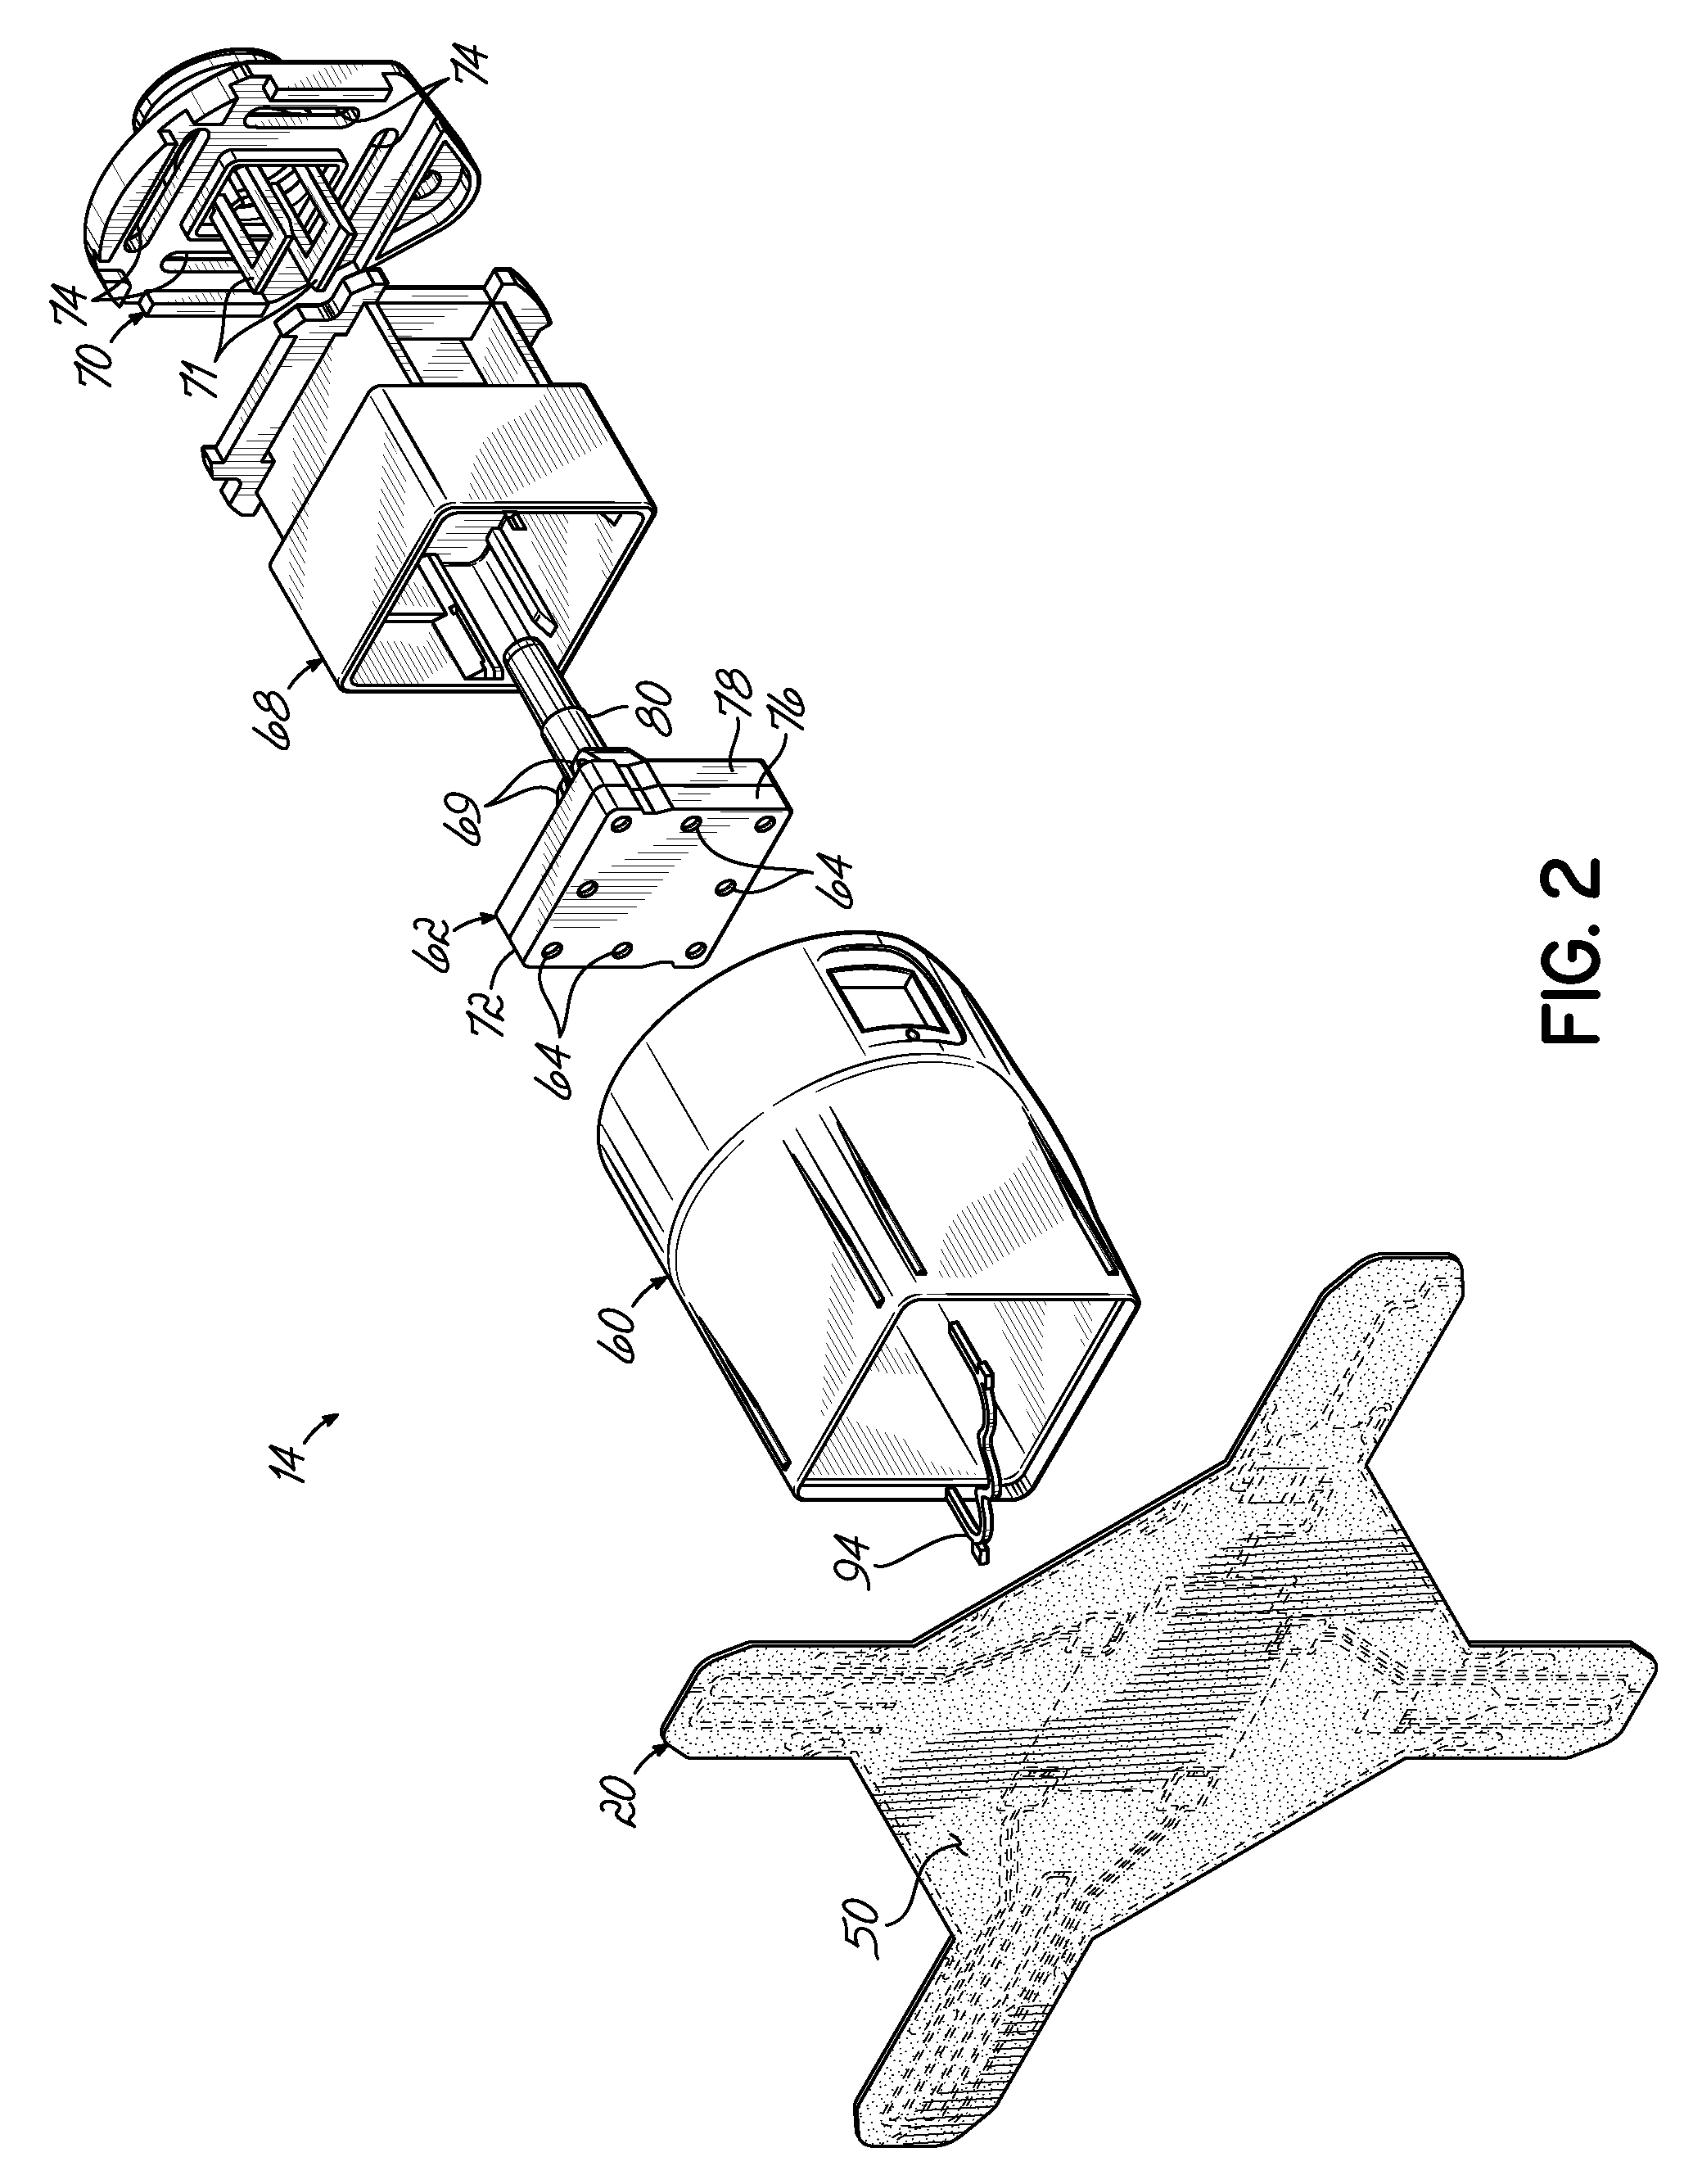 Patterned electrodes for tissue treatment systems